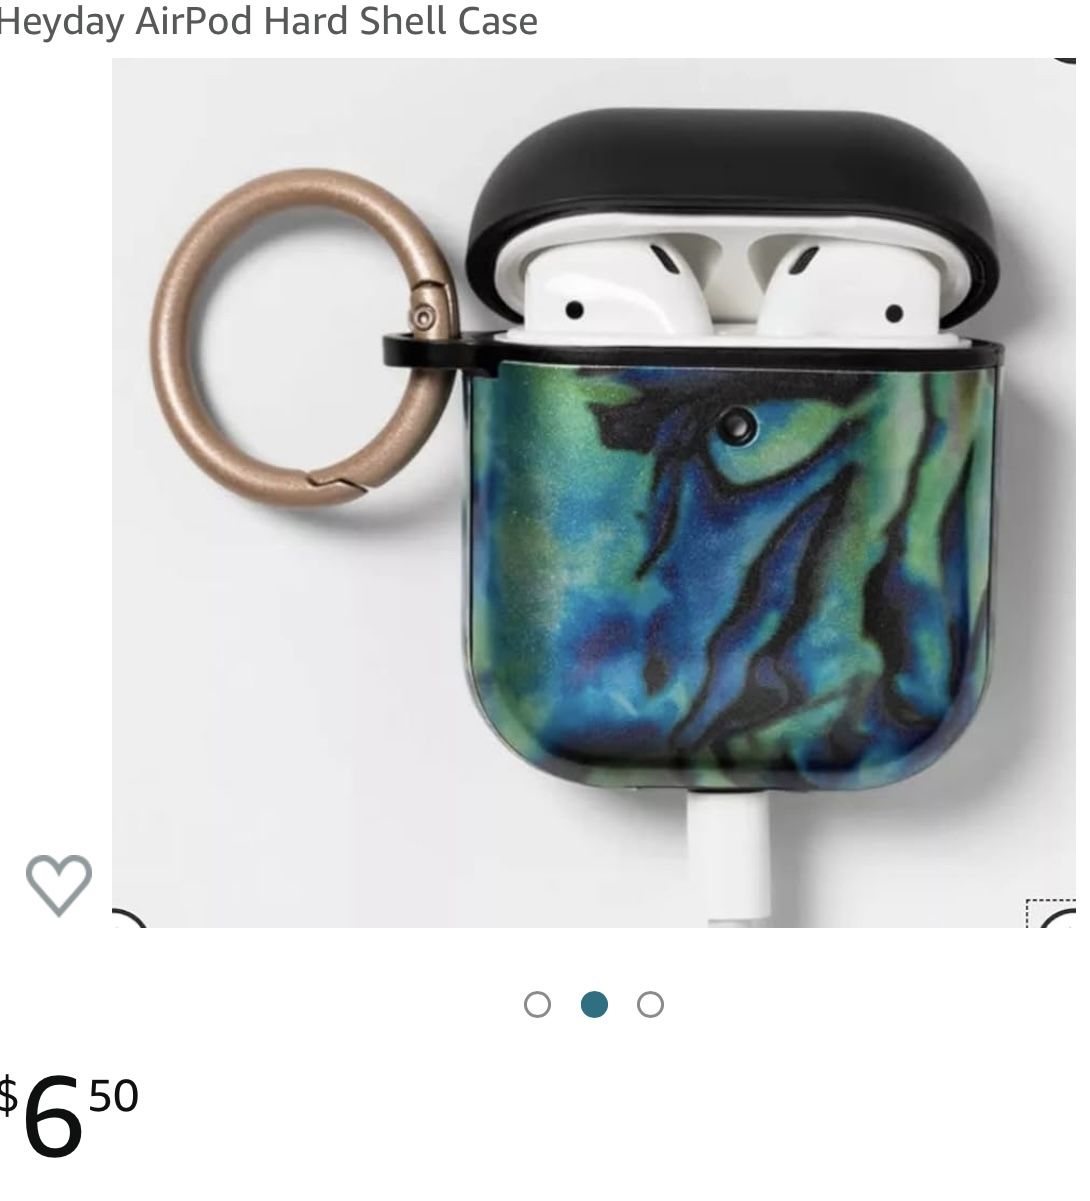 Earbud Case Cover